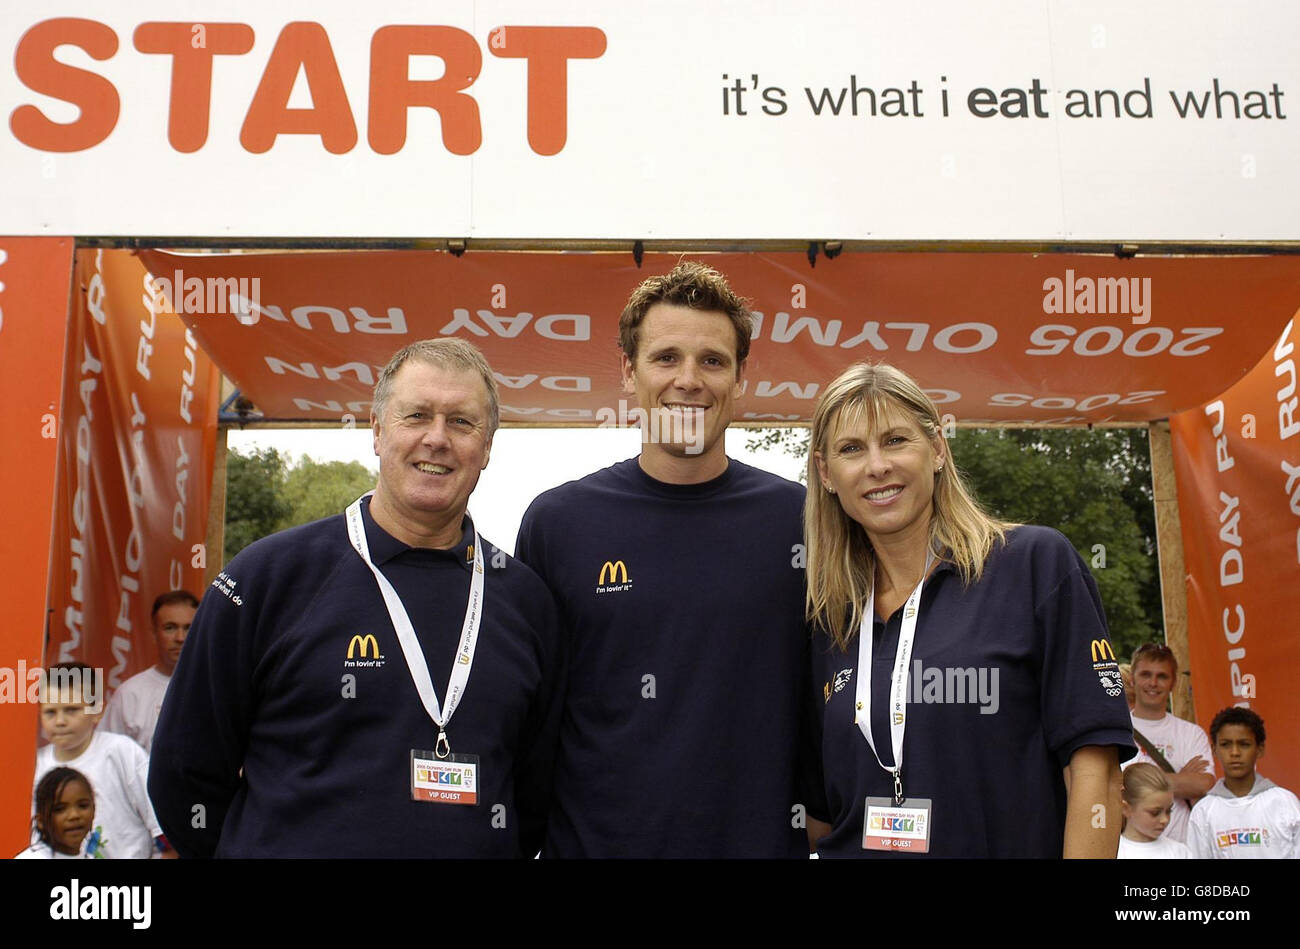 (From left to right) Sir Geoff Hurst MBE, James Cracknell OBE and Sharron Davies MBE, join forces to inspire kids to take more exercise. Stock Photo